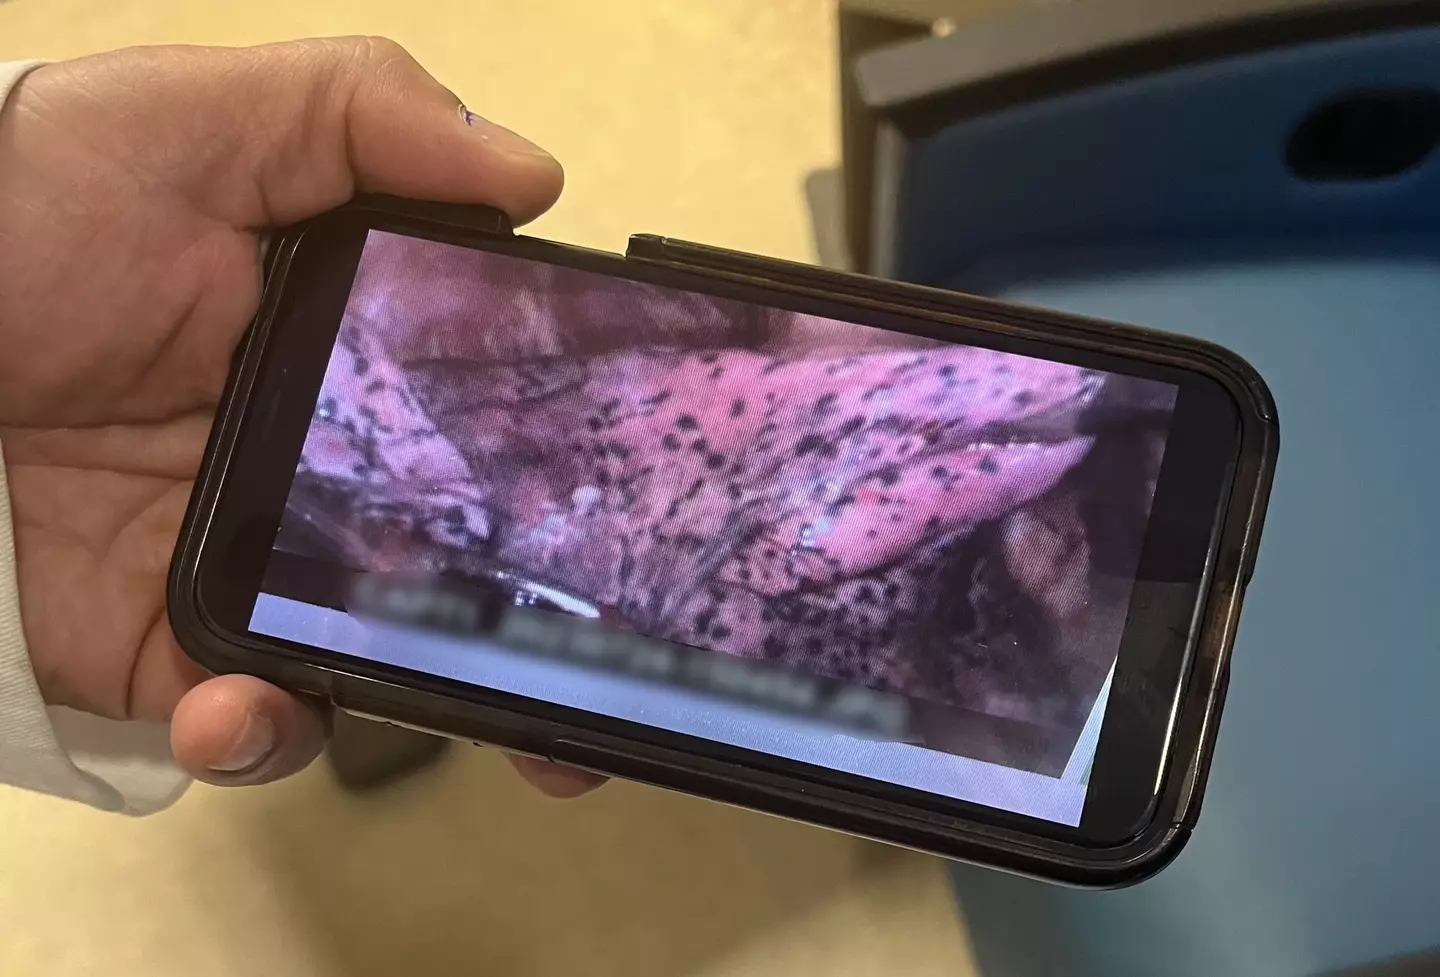 Sean was shown an image inside his lung, which was covered in black spots.